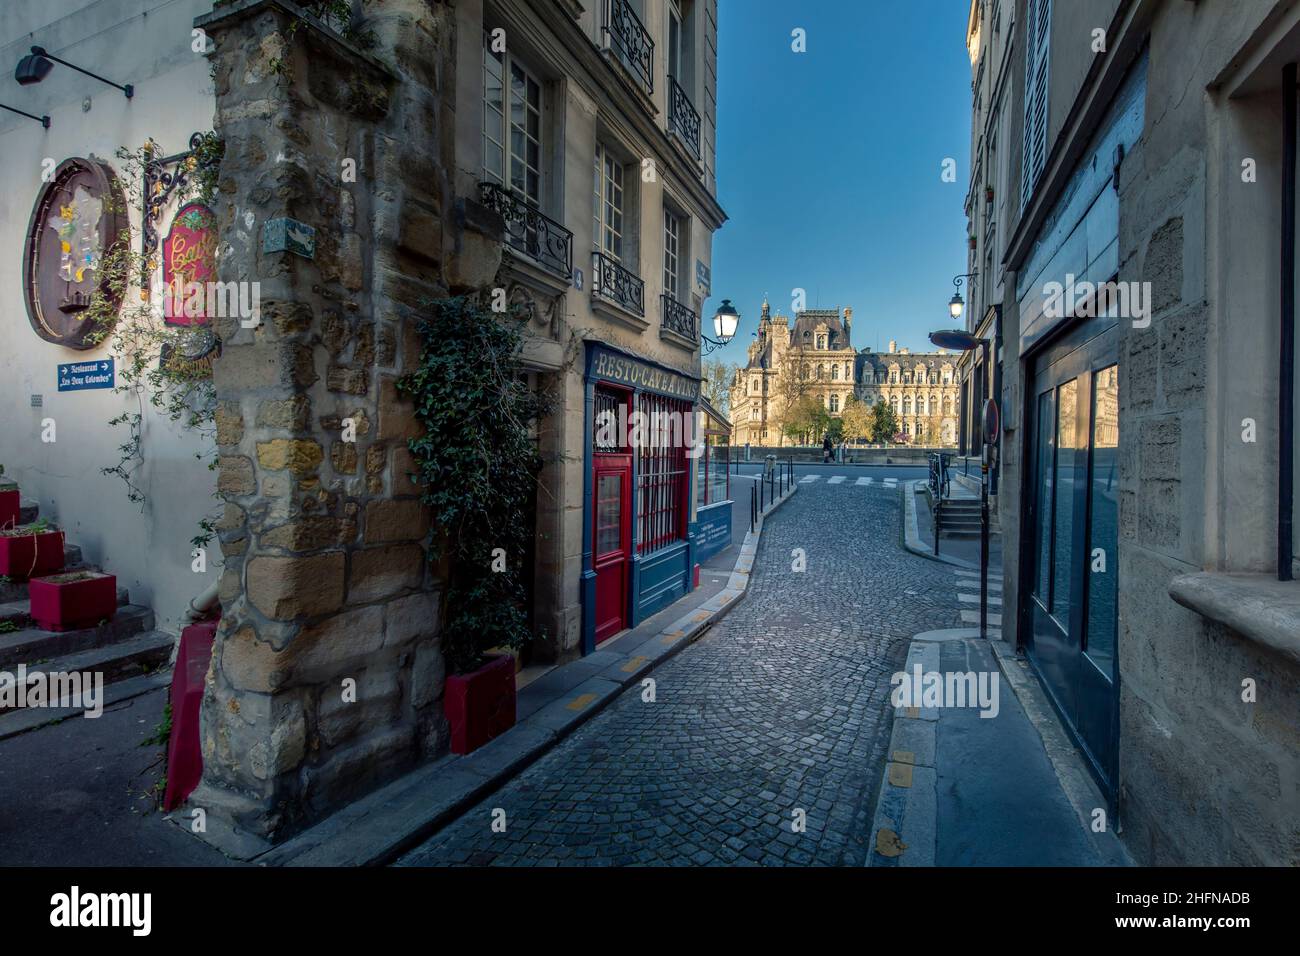 Paris, France - April 3, 2021: Small cosy street with City Hall in background in Paris Stock Photo